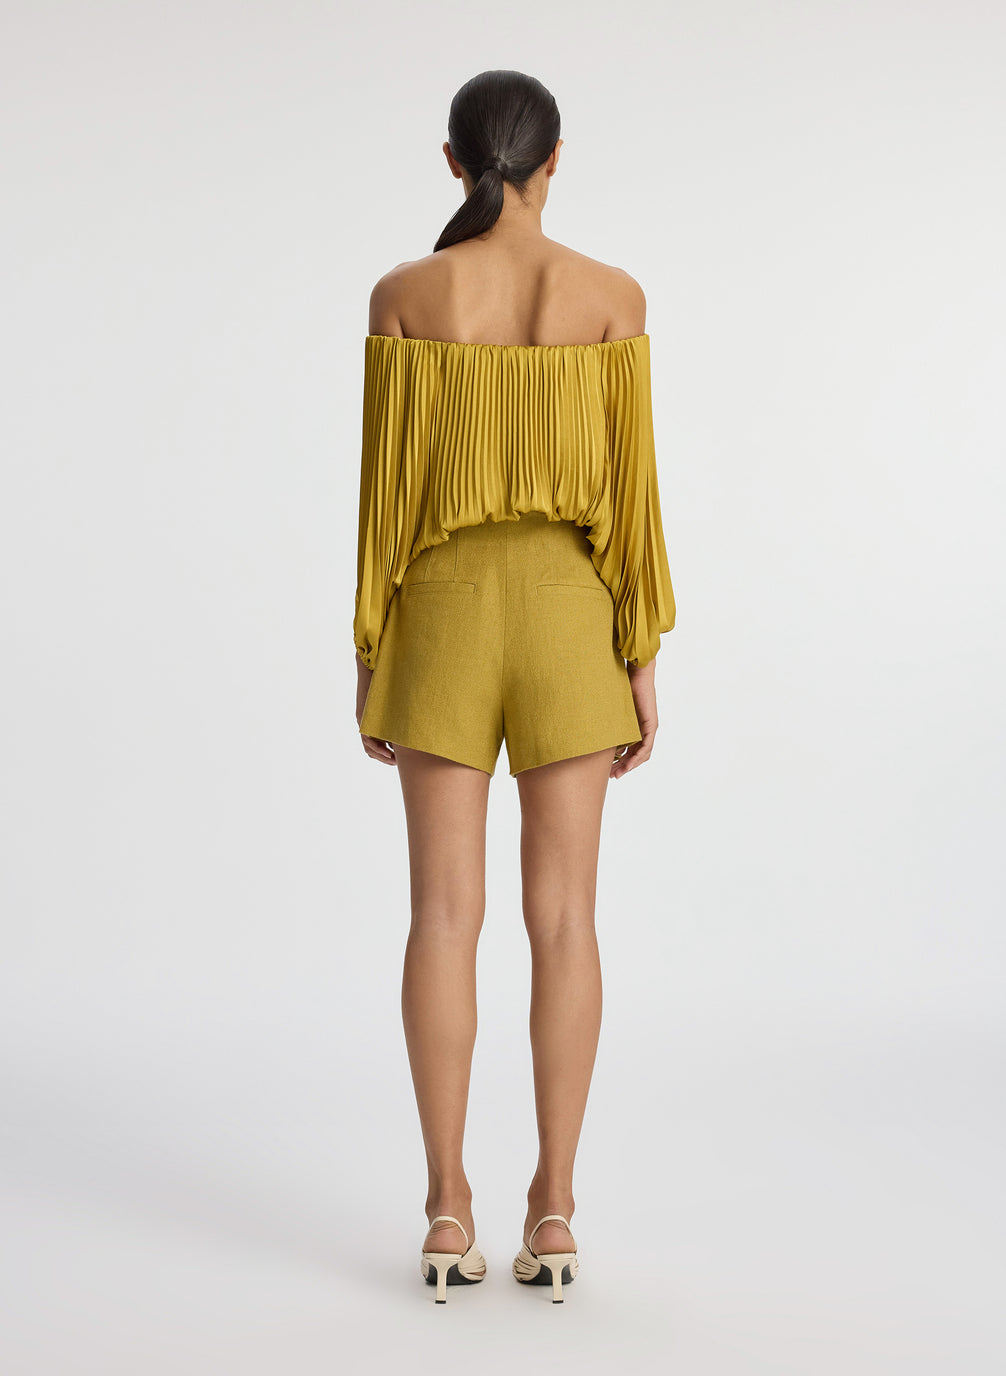 back view of woman wearing yellow pleated off shoulder top and yellow shorts